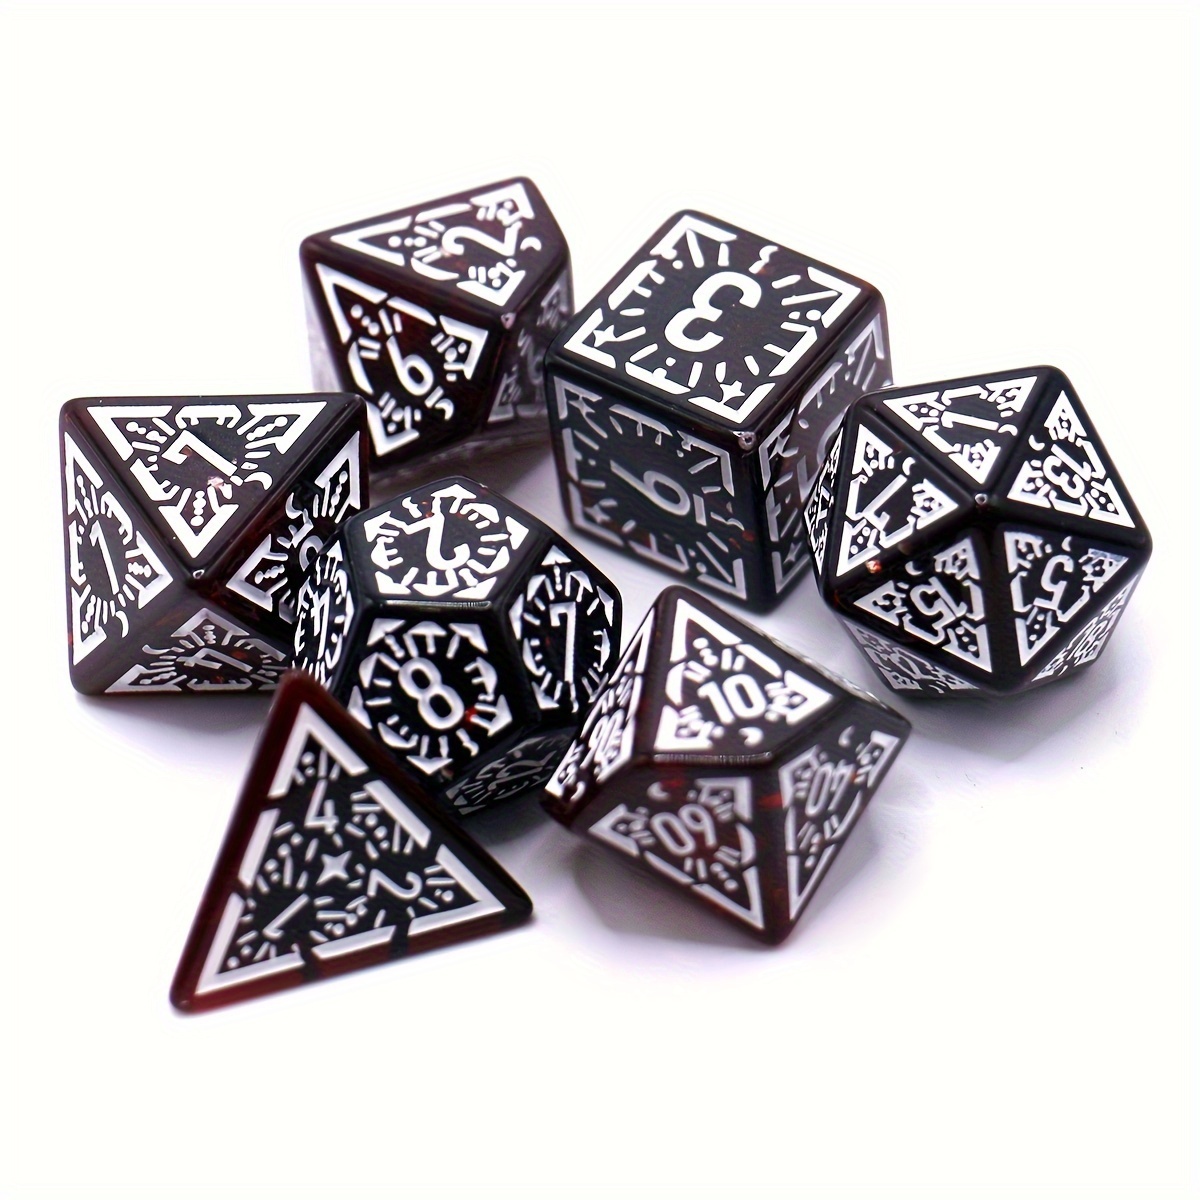 

7pcs Translucent Classical Rune Relief Board Game Dice Set, Polyhedral Table Game Dices For Rpg Dice Games